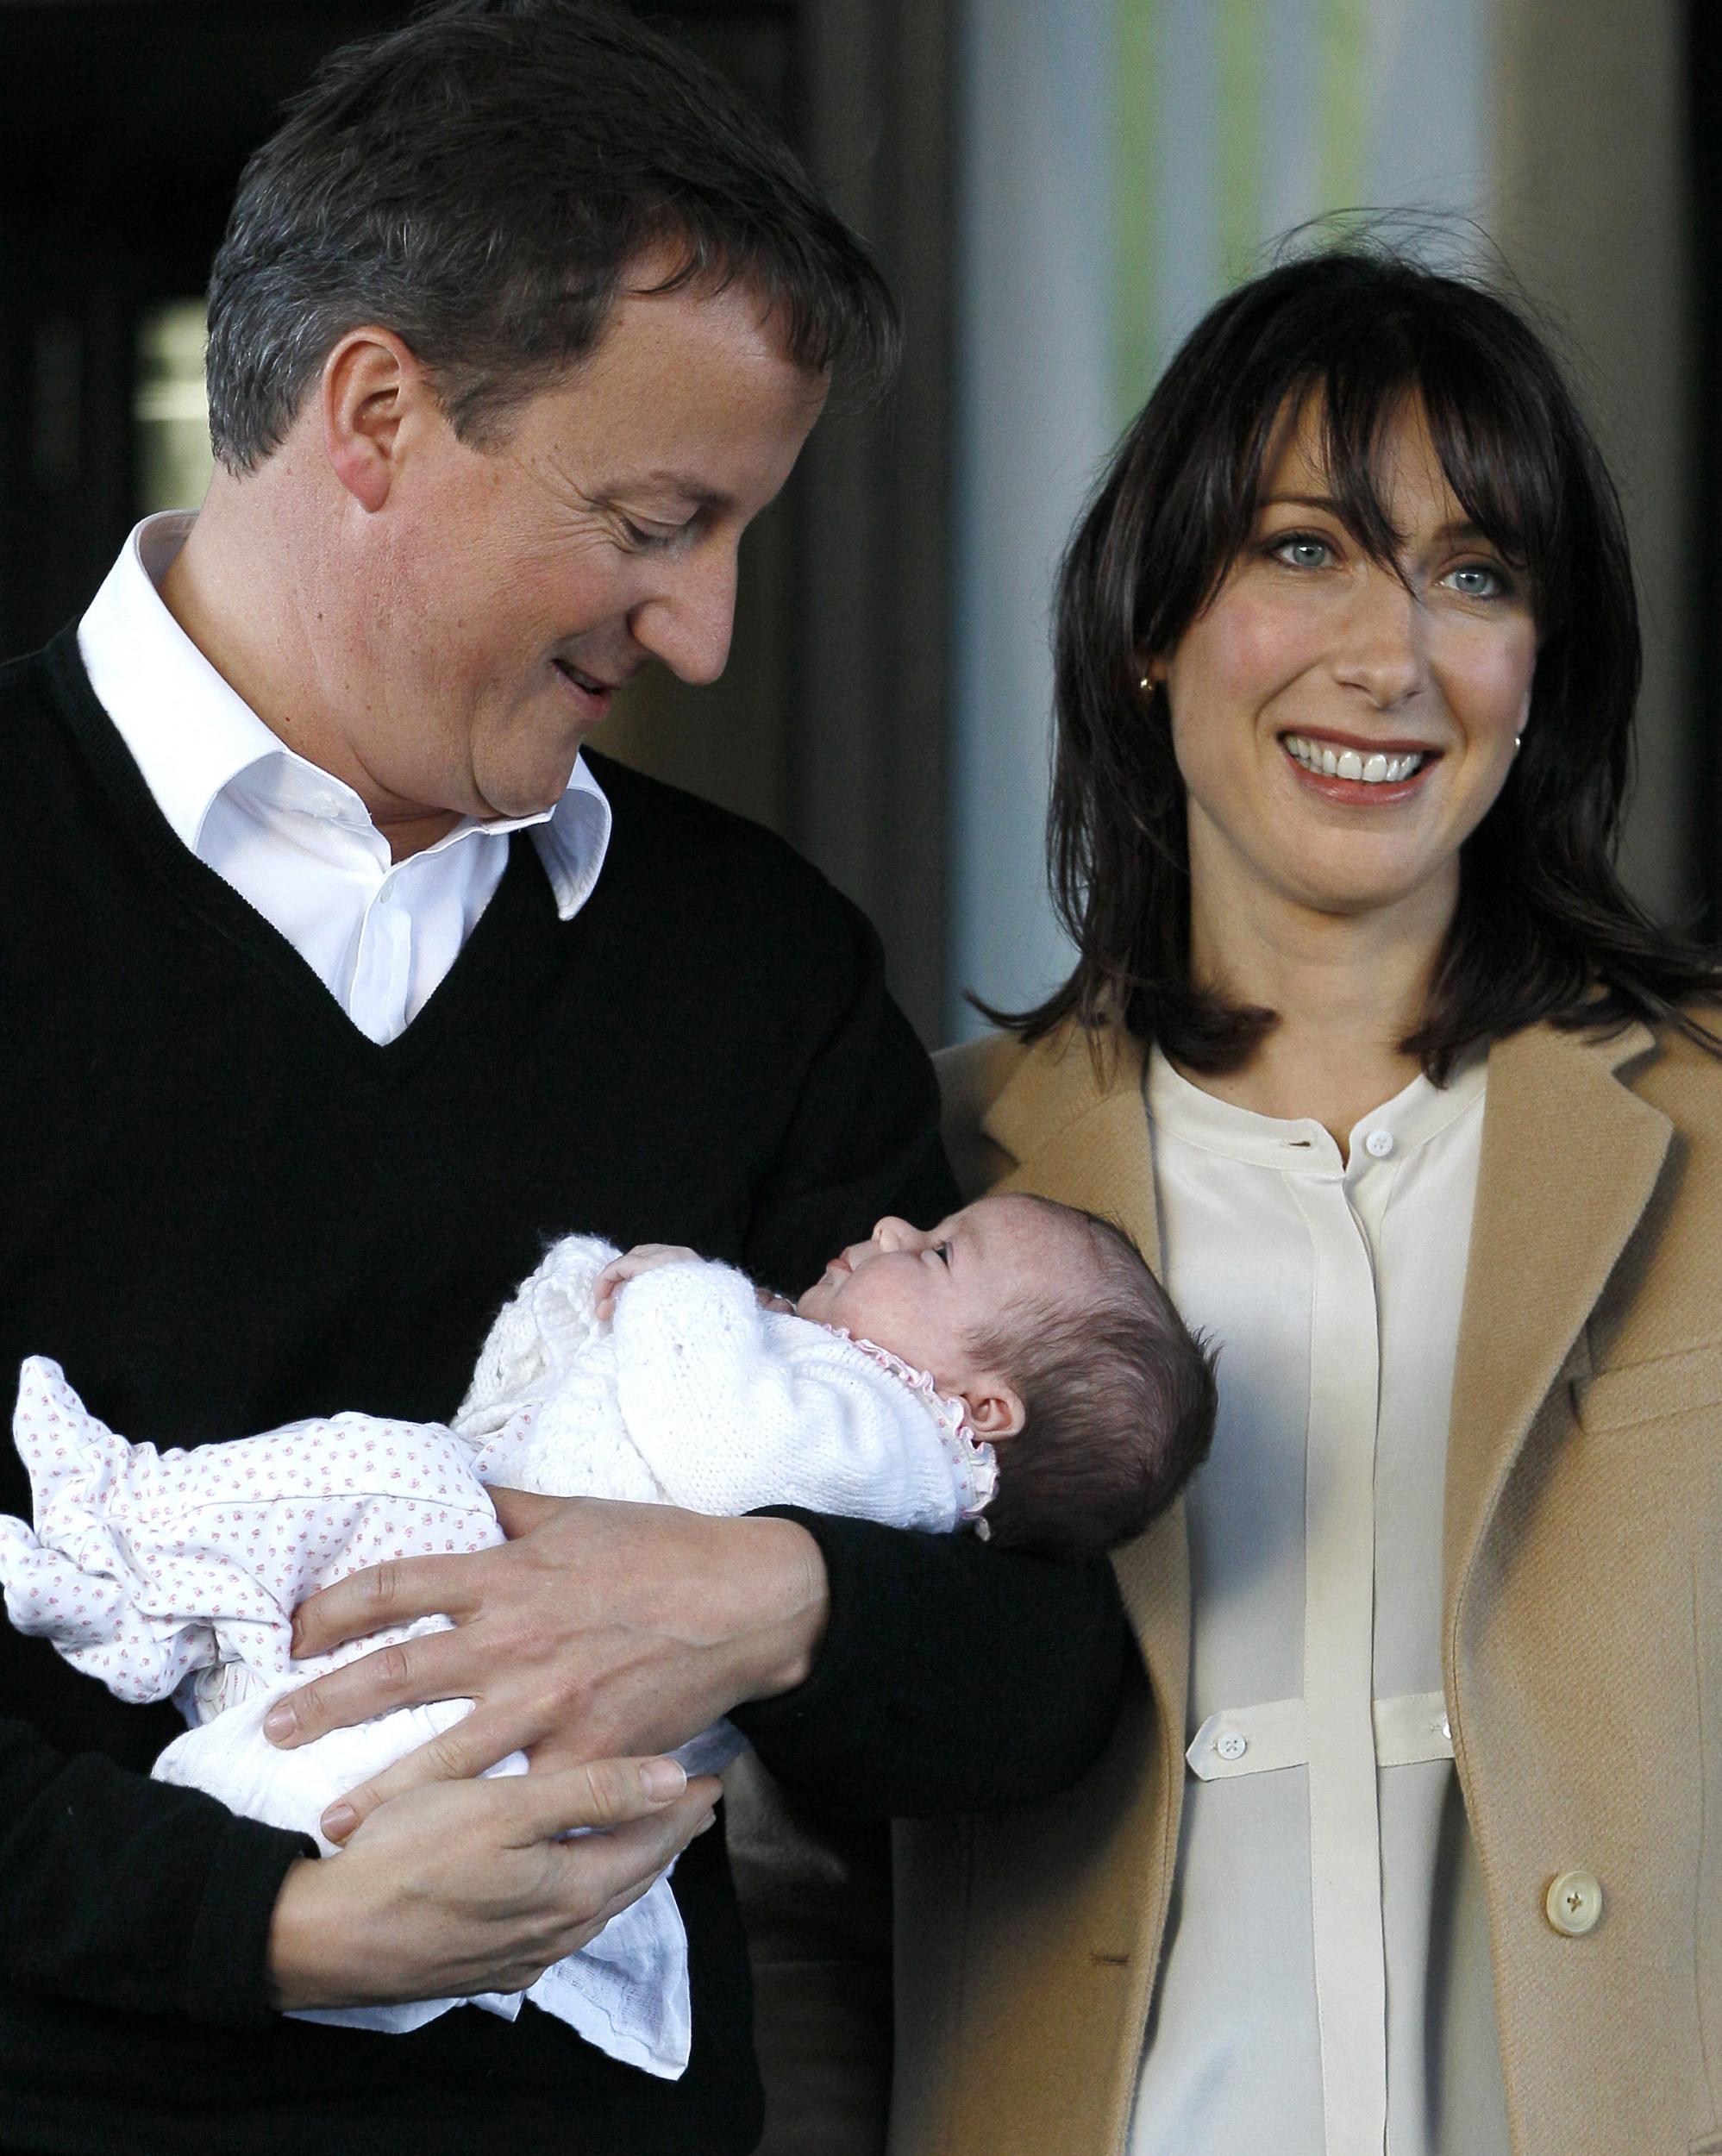 David Cameron arrives with his wife Samantha and their baby daughter Florence (5 October 2010)